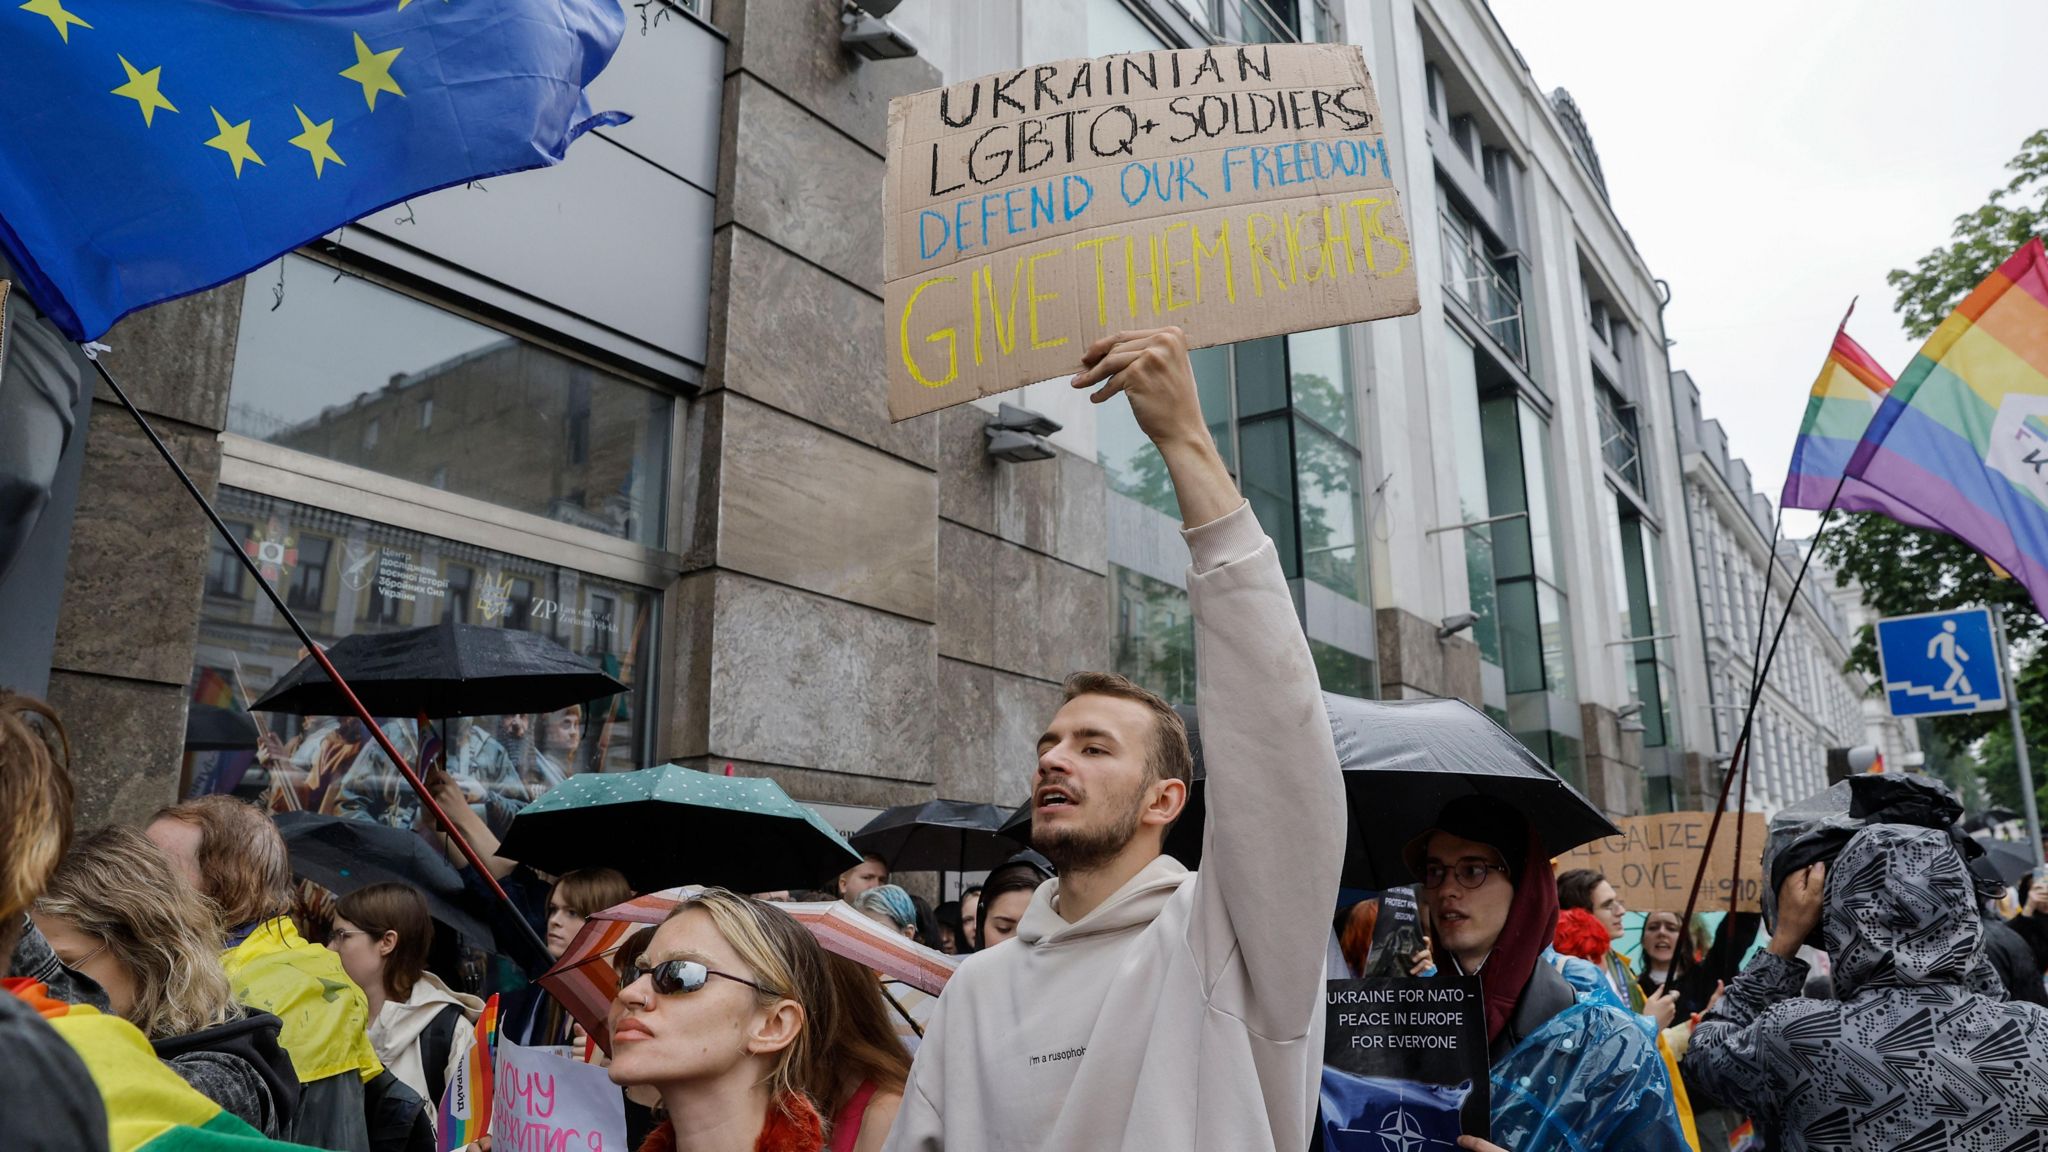 People at Pride march including a man holding a sign saying "Ukrainian LGBTQ soldiers defend our freedom - give them their rights"